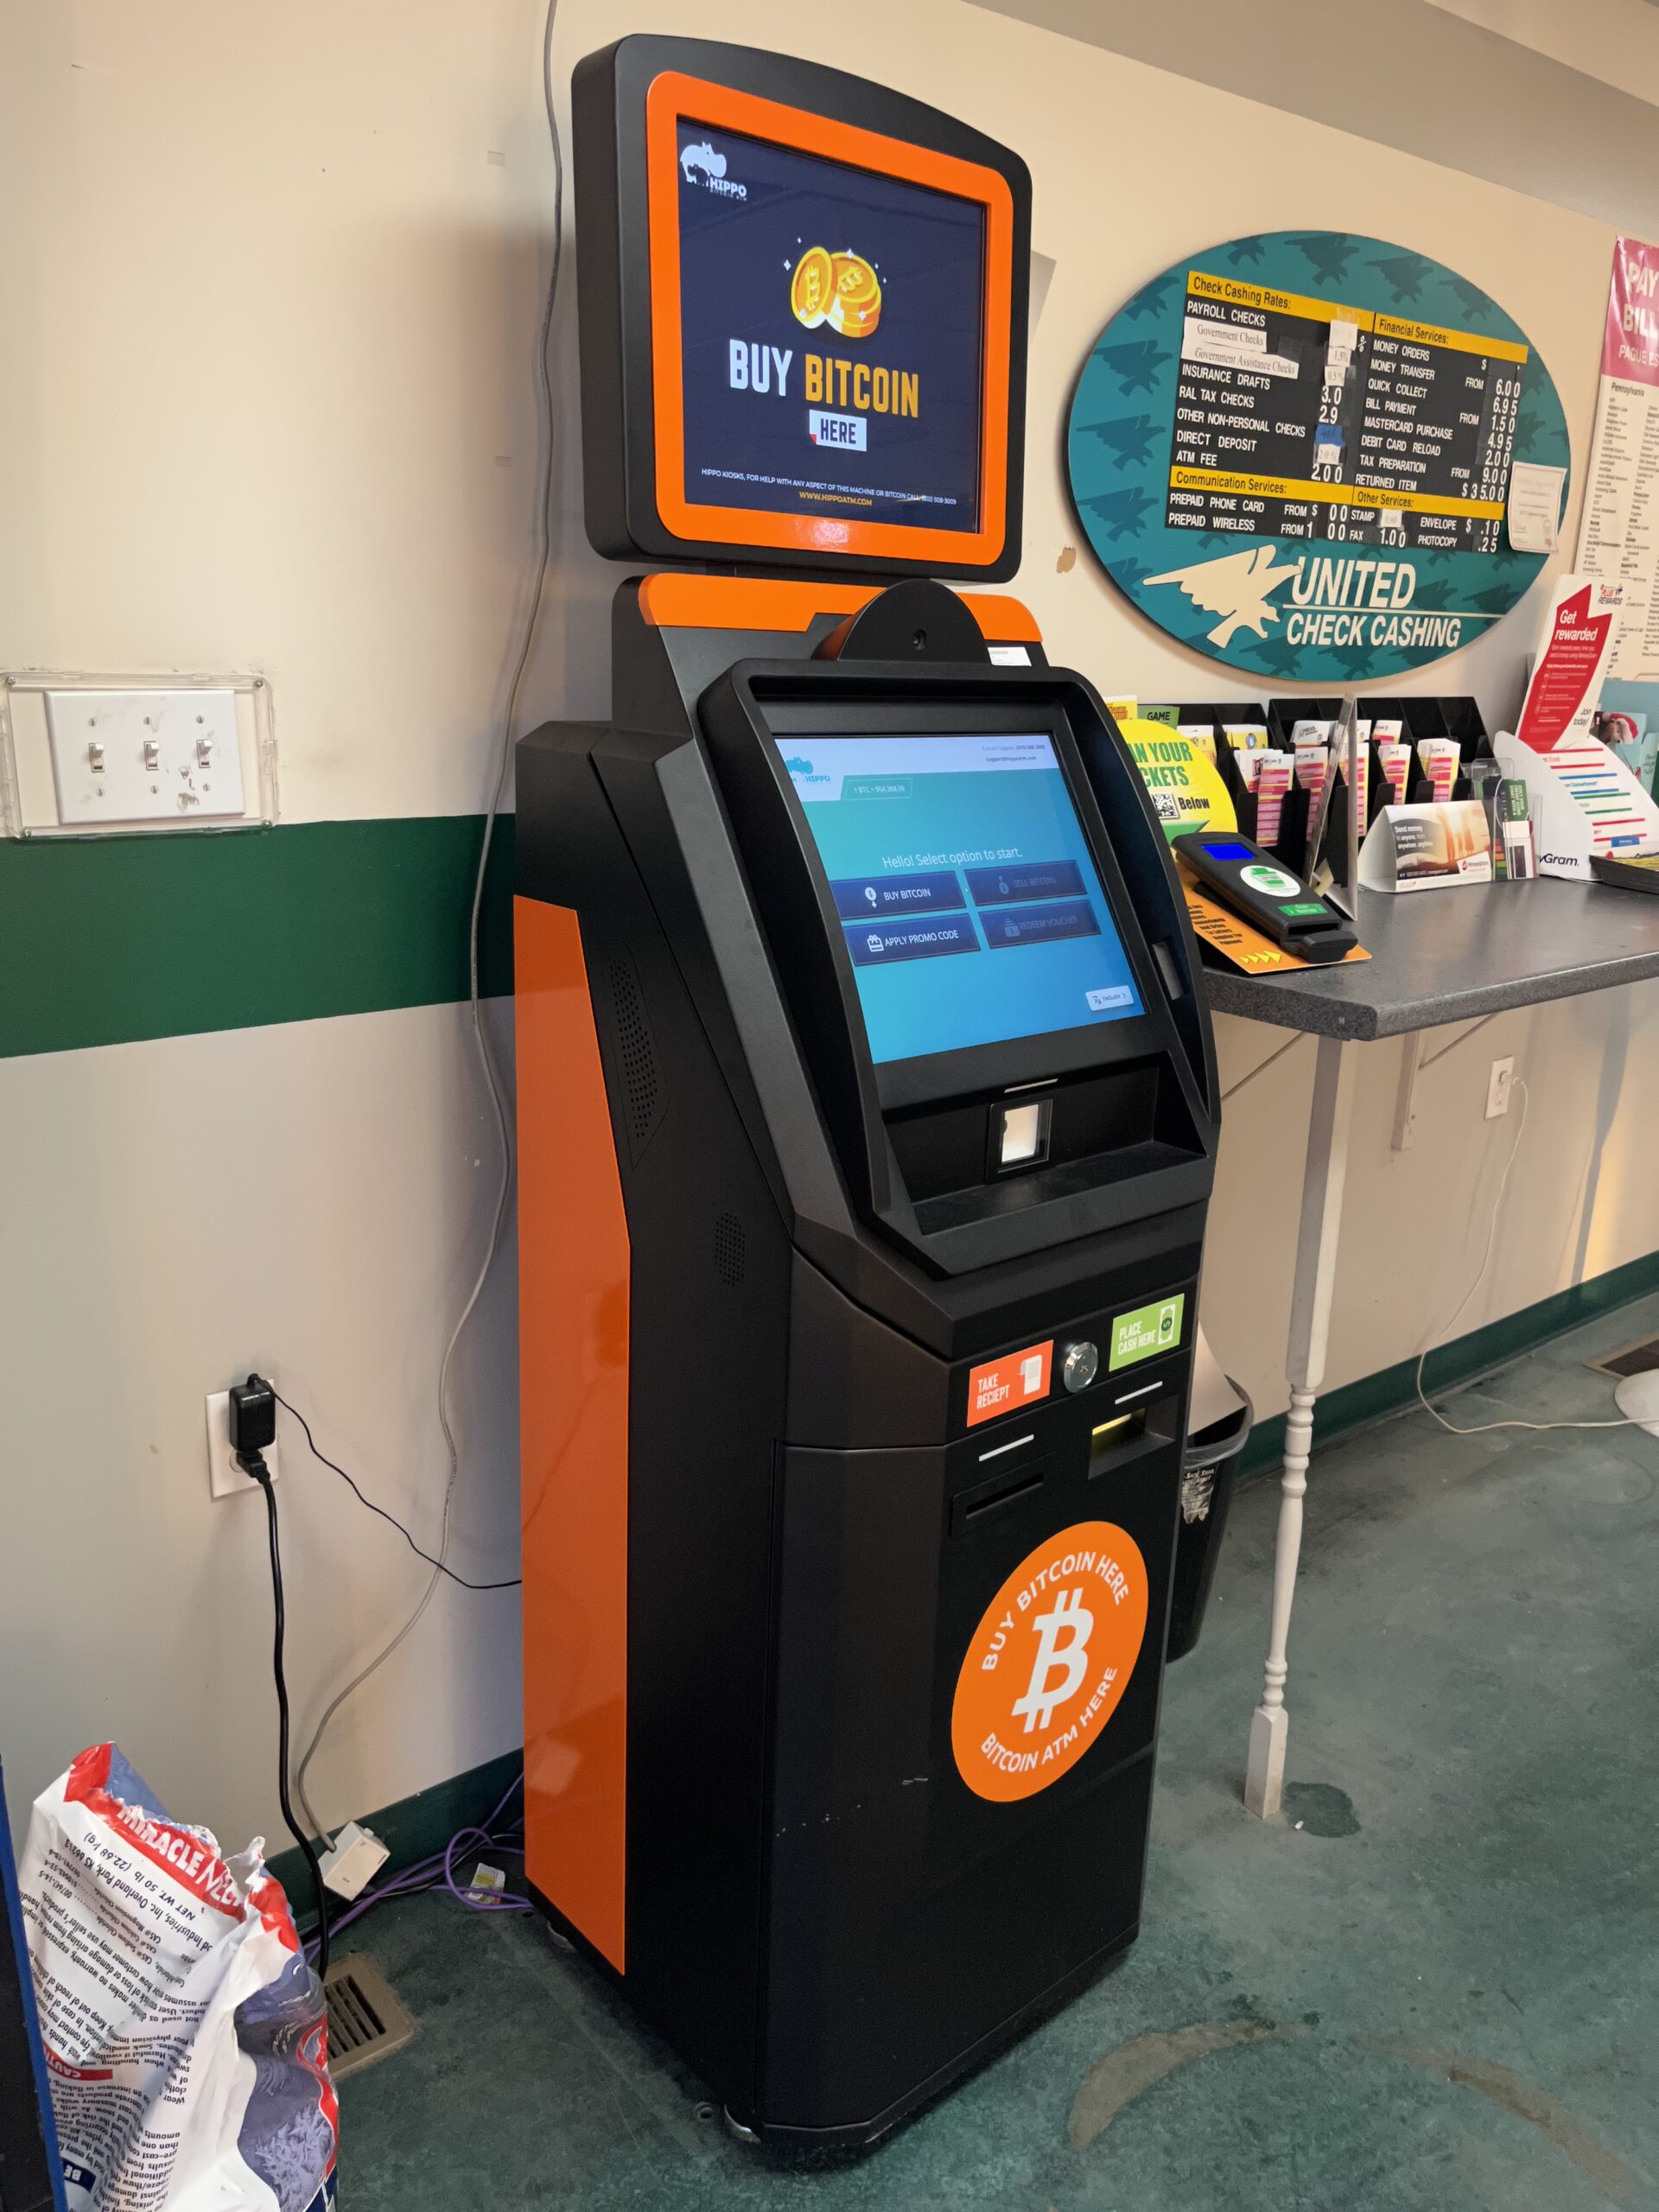 Bitcoin atm at Allentown at United Check Cashing address 1105 Union Blvd, Allentown, PA 18109 by Hippo Kiosks Bitcoin ATM